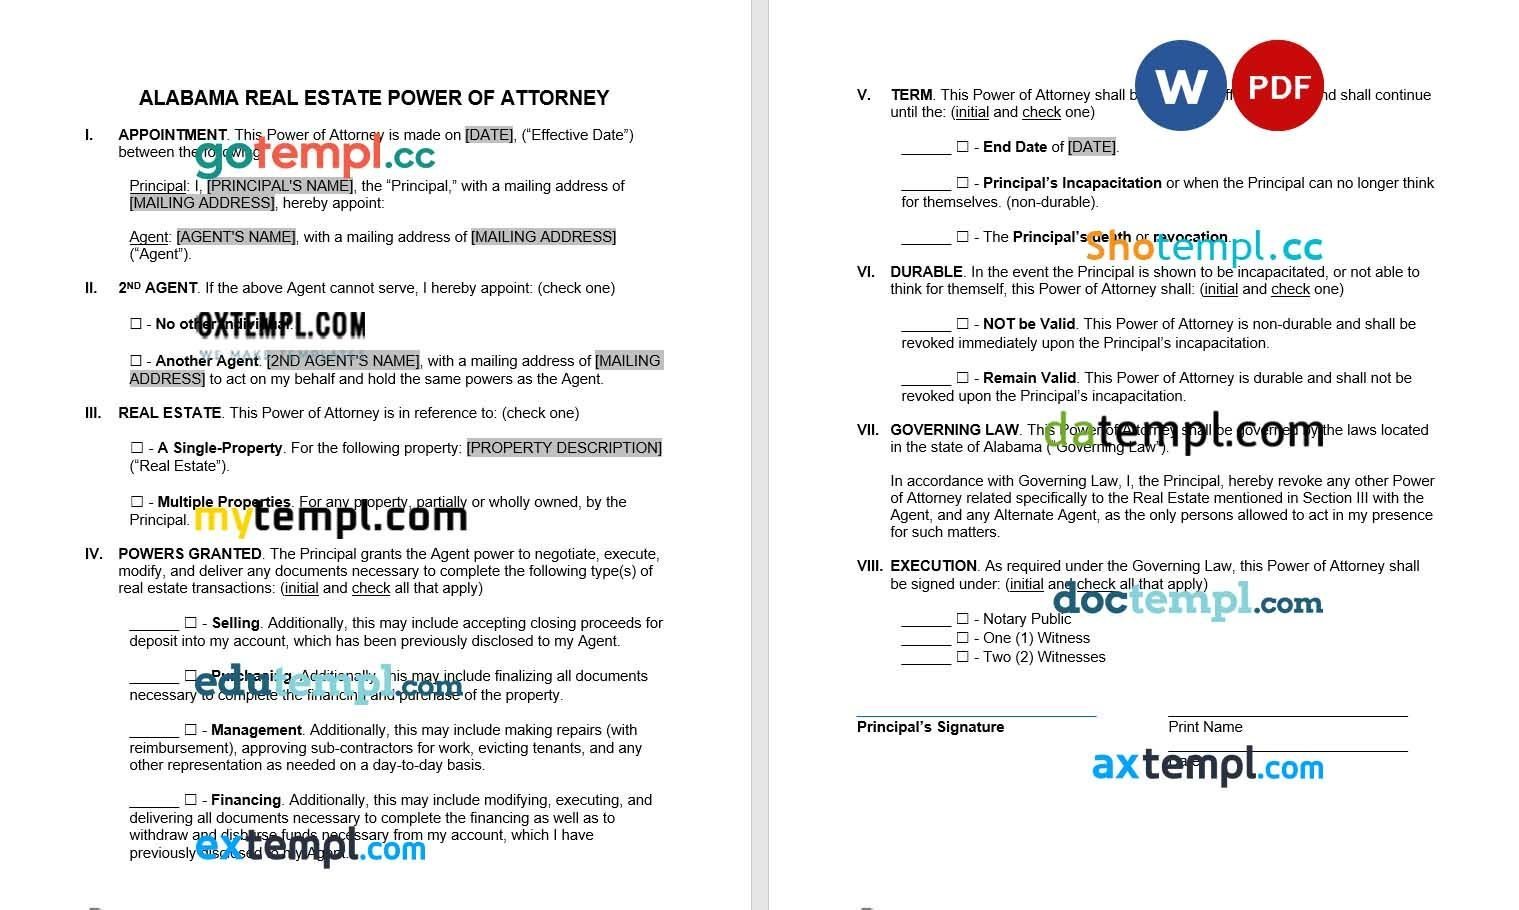 Alabama Real Estate Power of Attorney Form example, fully editable